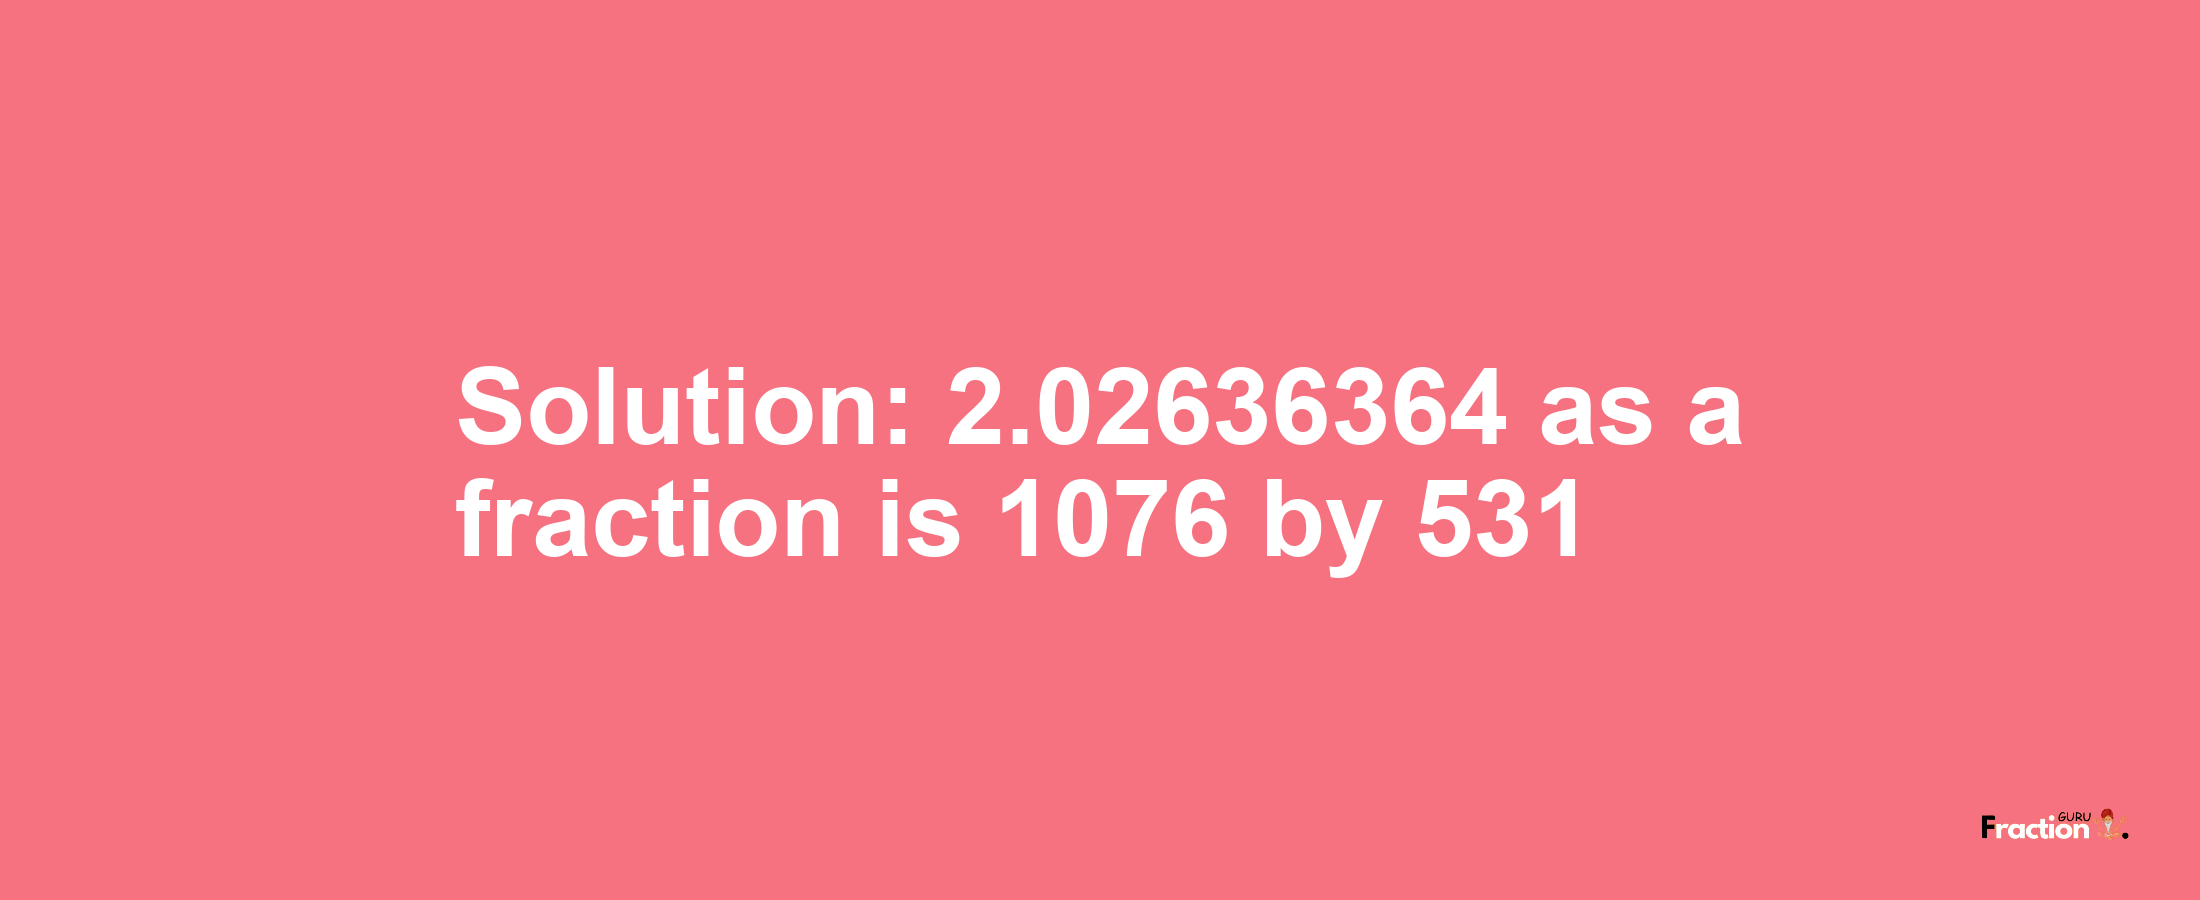 Solution:2.02636364 as a fraction is 1076/531